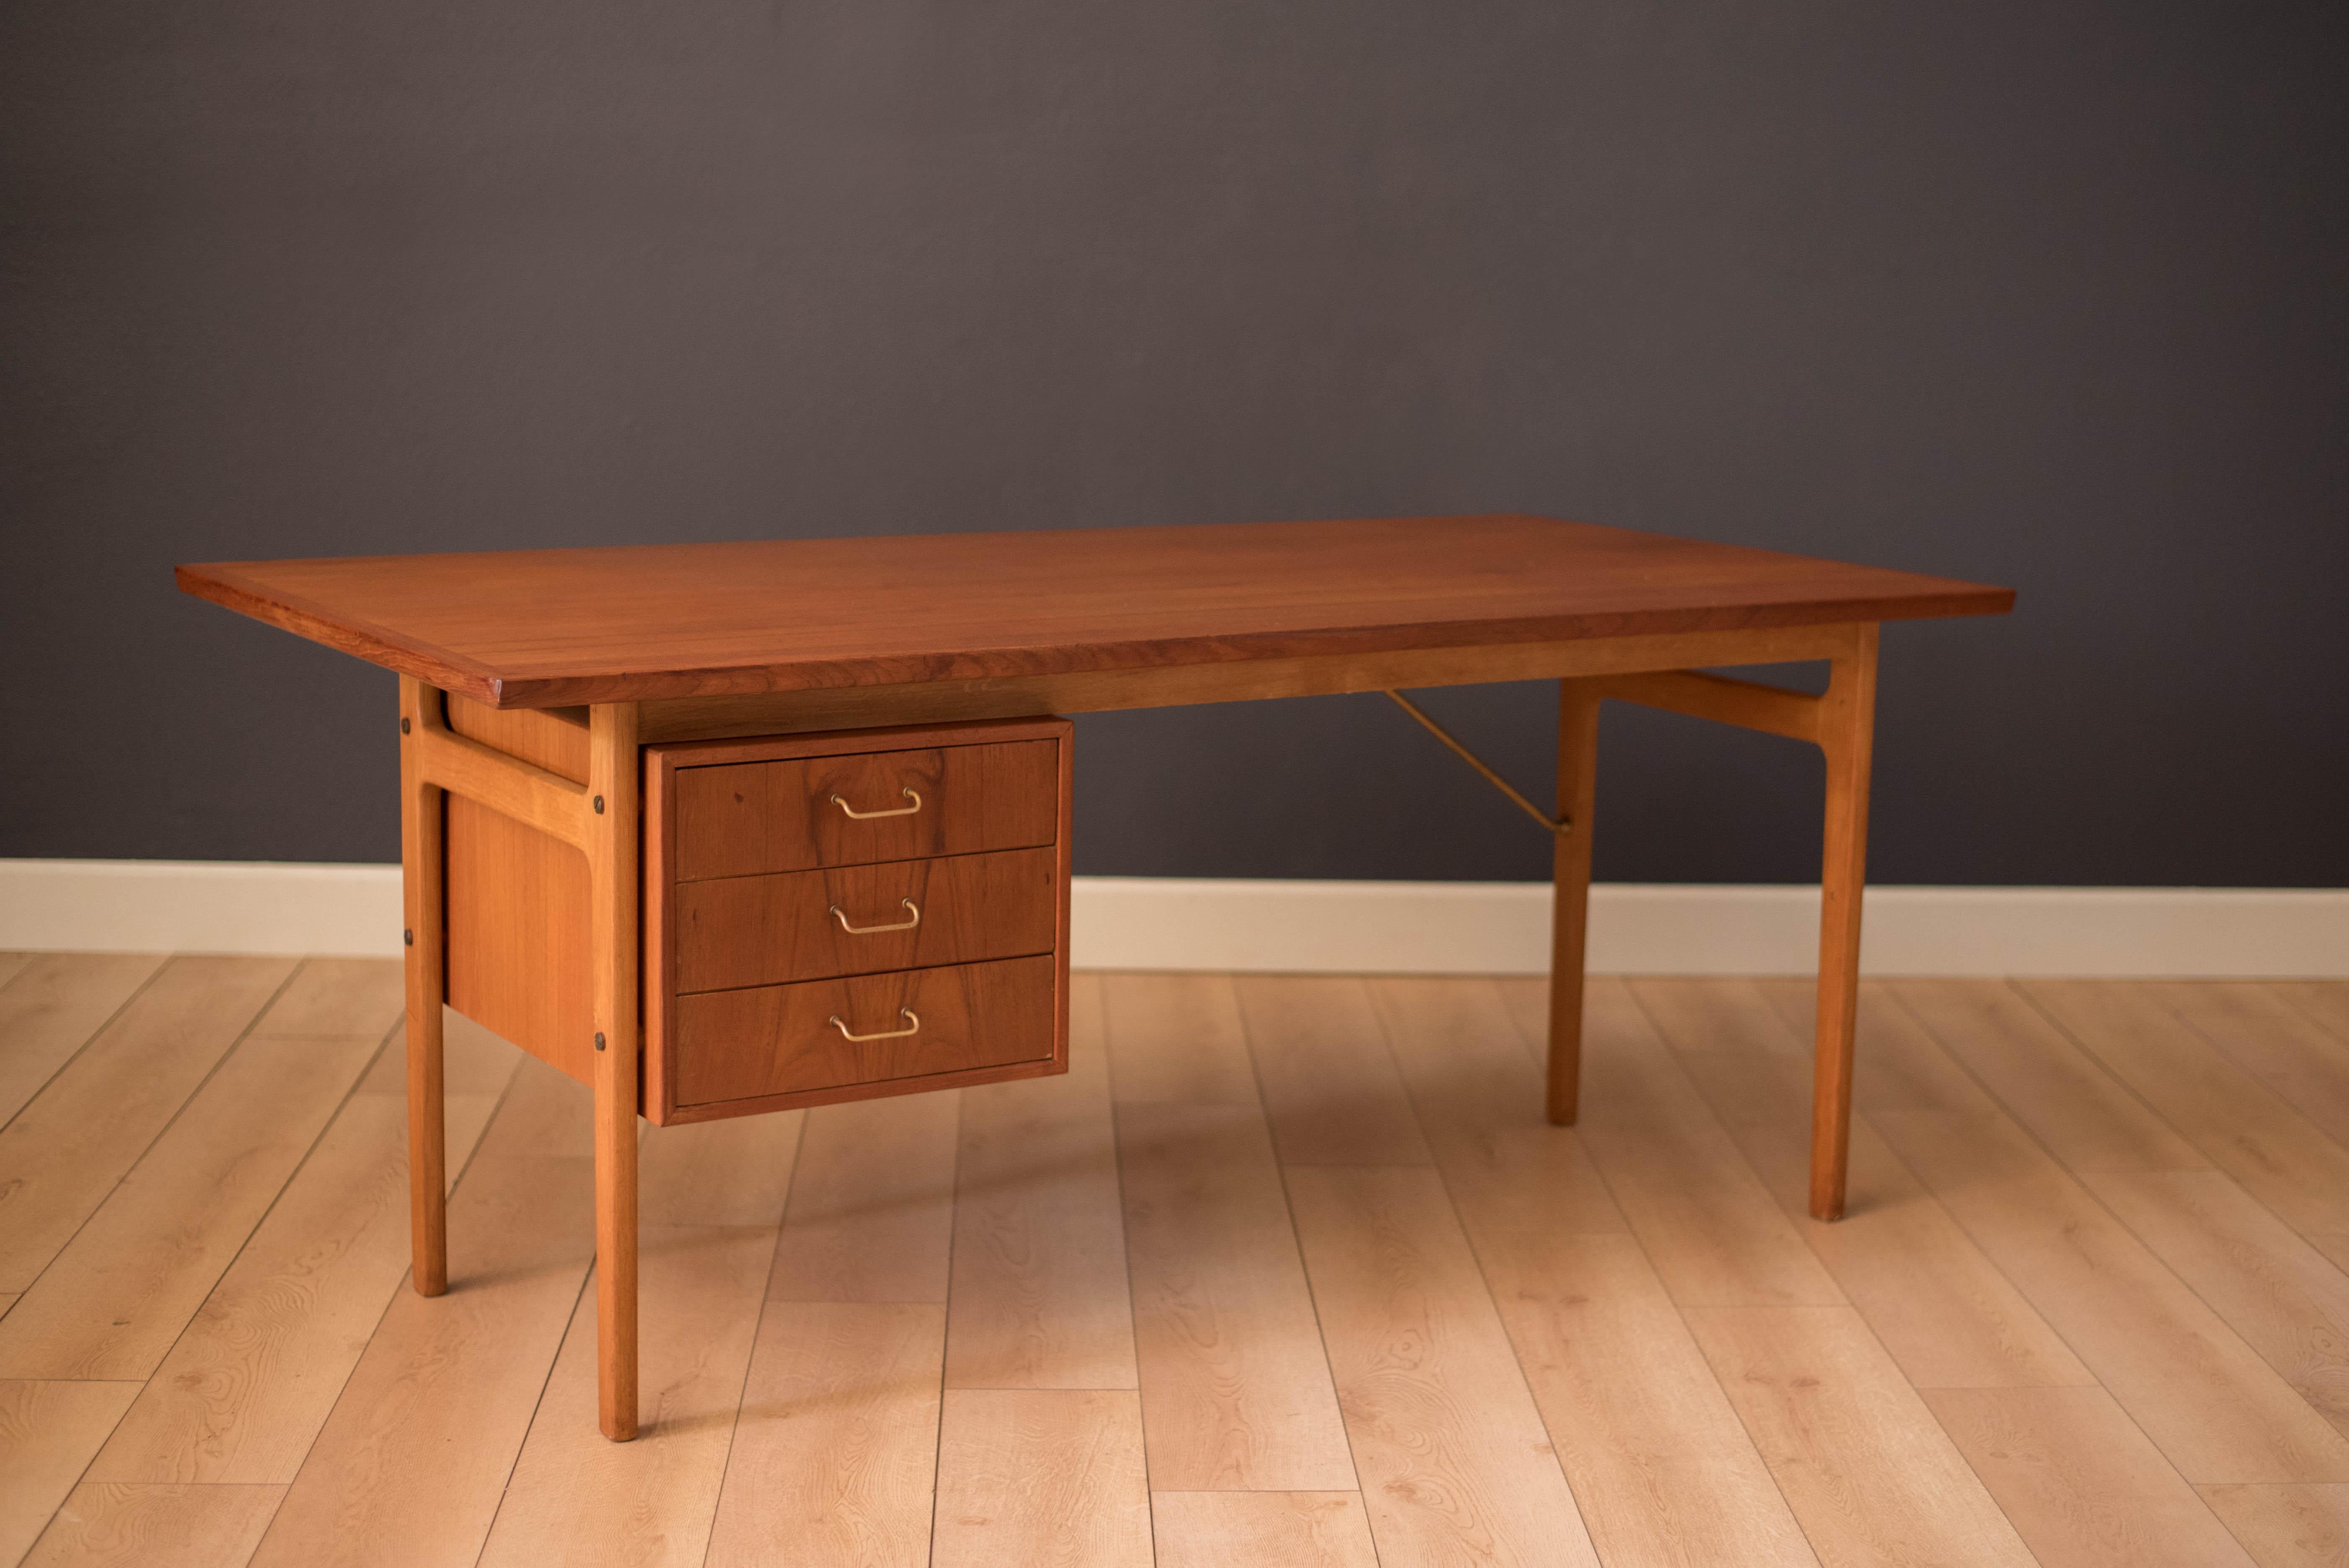 Mid century writing desk designed by Torben Strandgaard for Falster Mobelfabrik. This piece features a large teak desktop equipped with three dovetailed drawers and brass accents. Supporting leg base is made of oak.